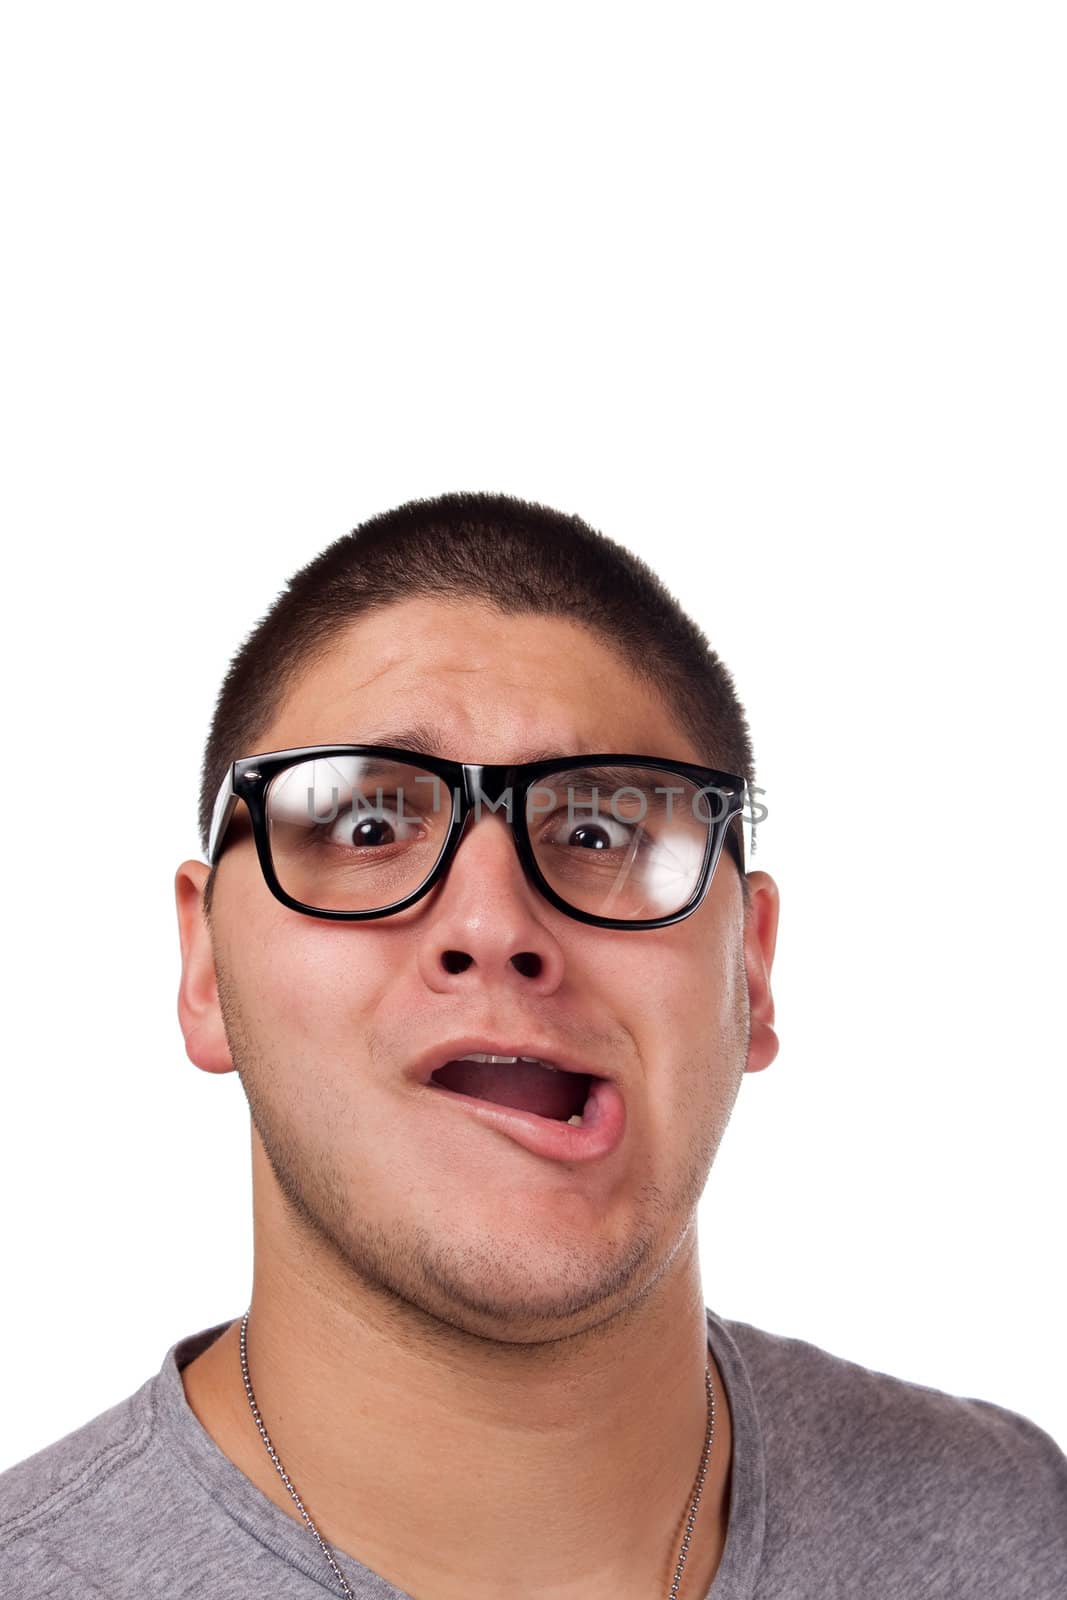 A goofy man wearing trendy nerd glasses isolated over white with a funny expression on his face.